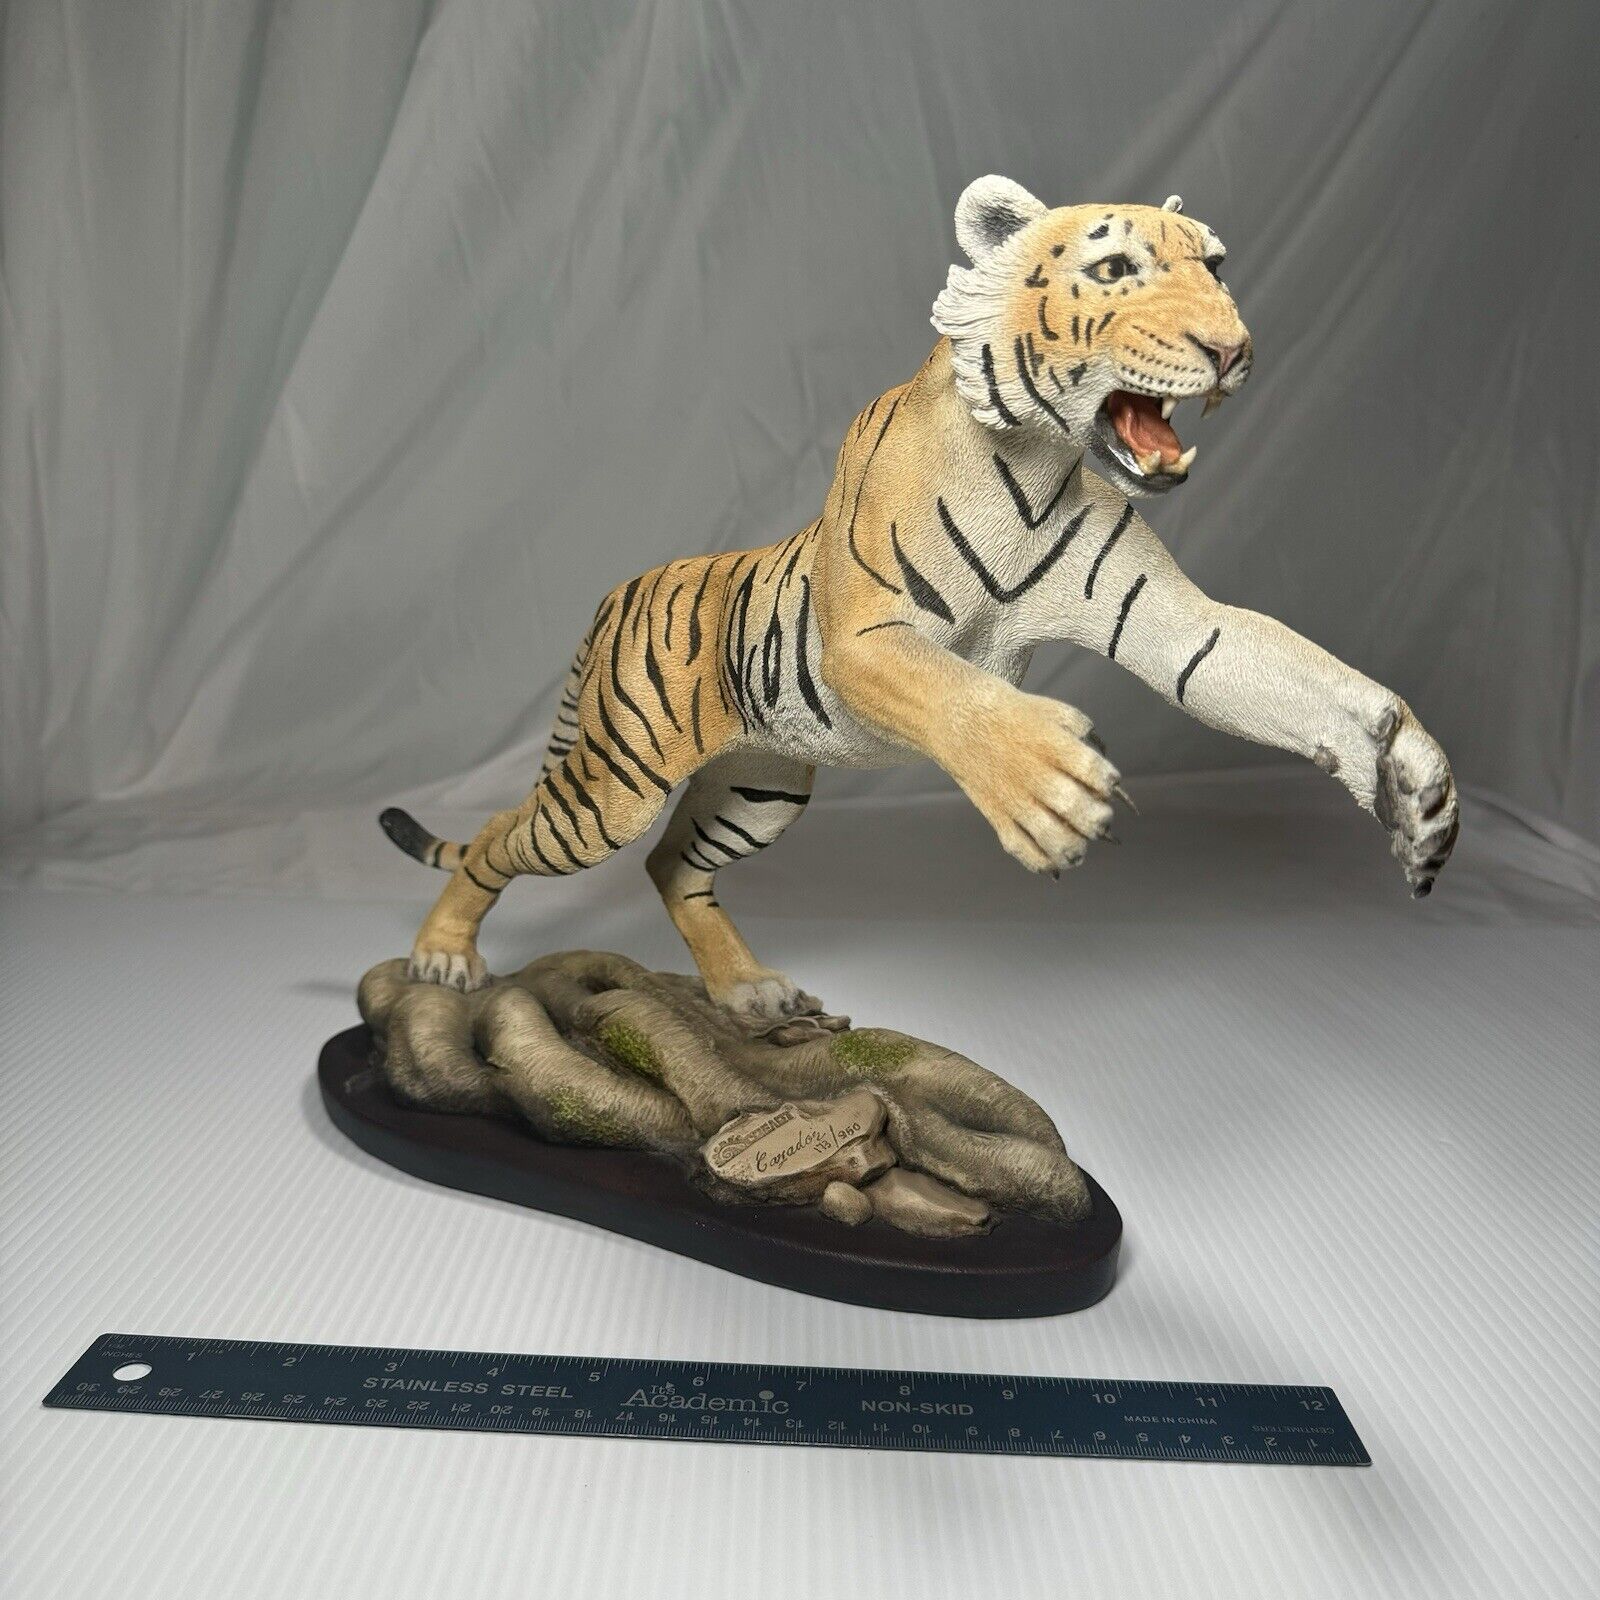 Vintage Creart Lunging Tiger Statue #173/950 See Photos